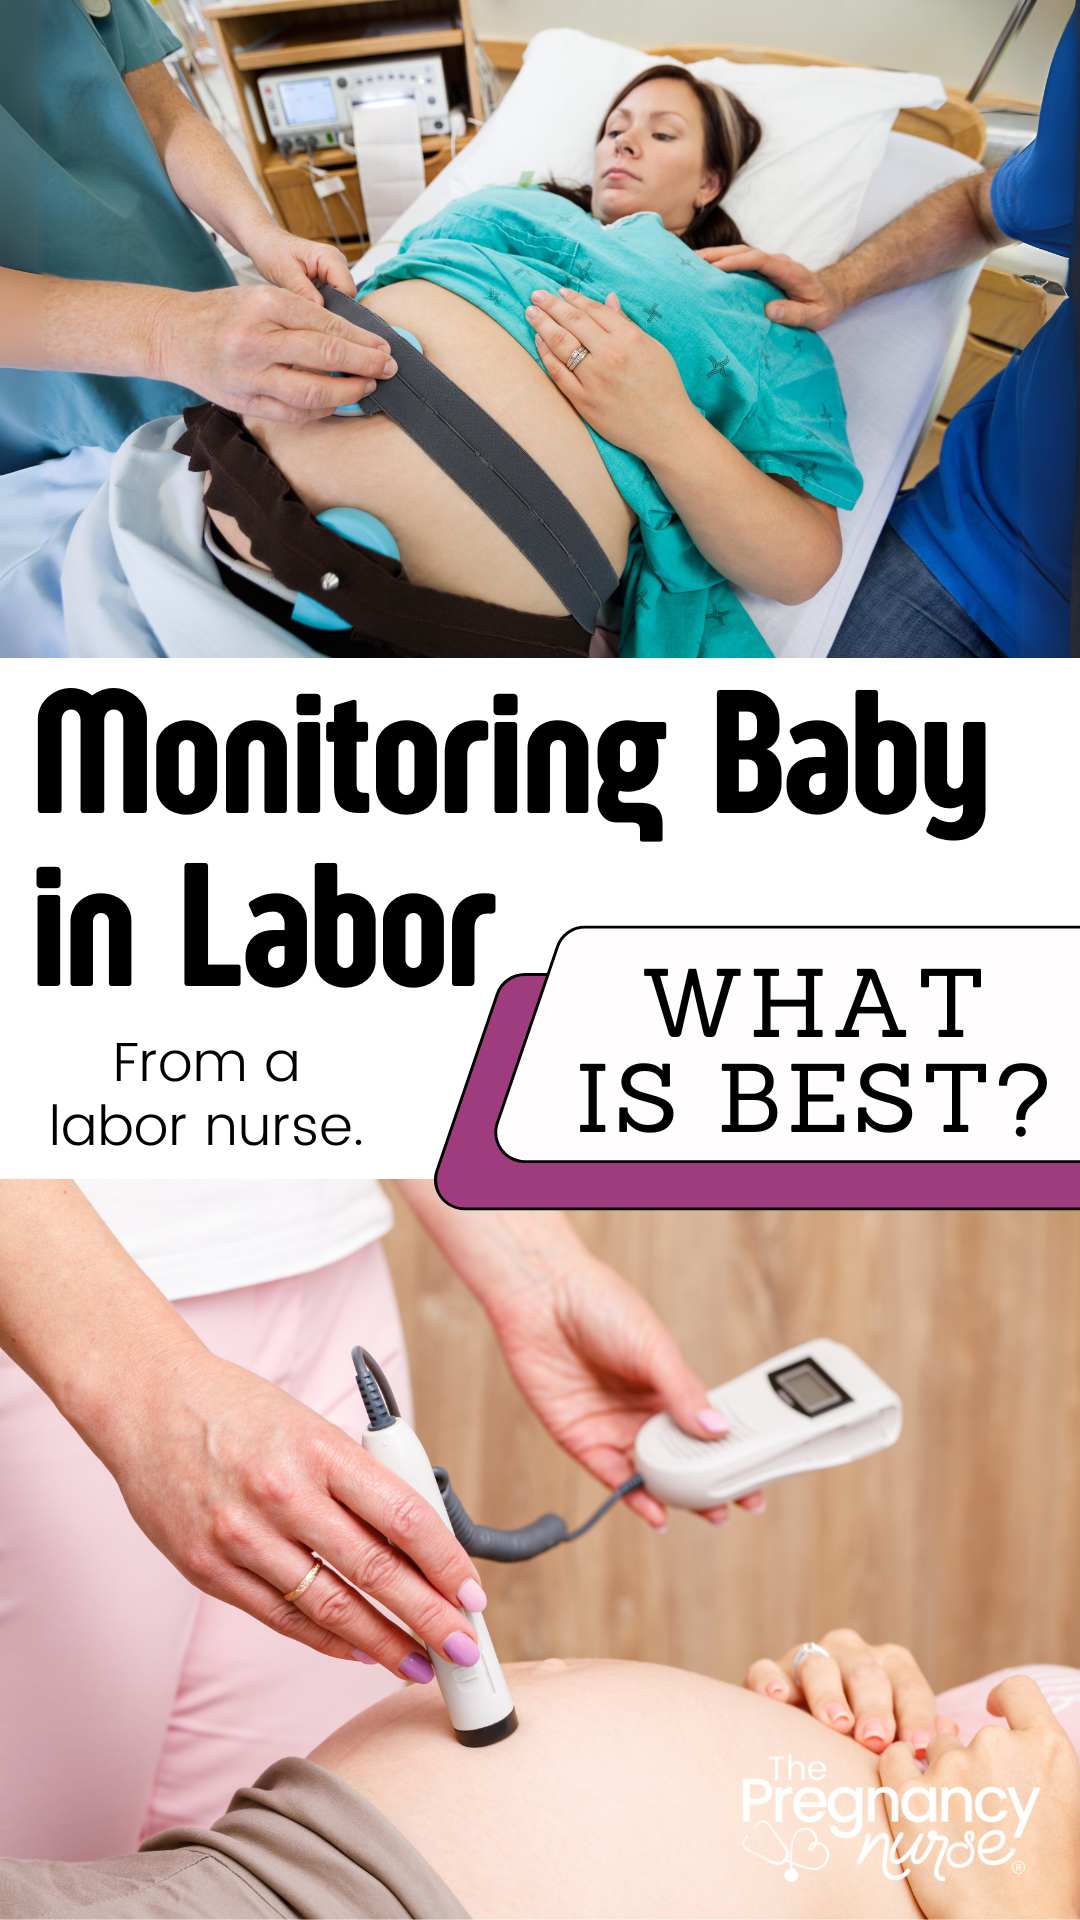 Informative breakdown of the two types of fetal monitoring - Intermittent Auscultation and Continuous Fetal Monitoring. Learn everything you need to know about these methods, their pros and cons, and what you can expect during labor.